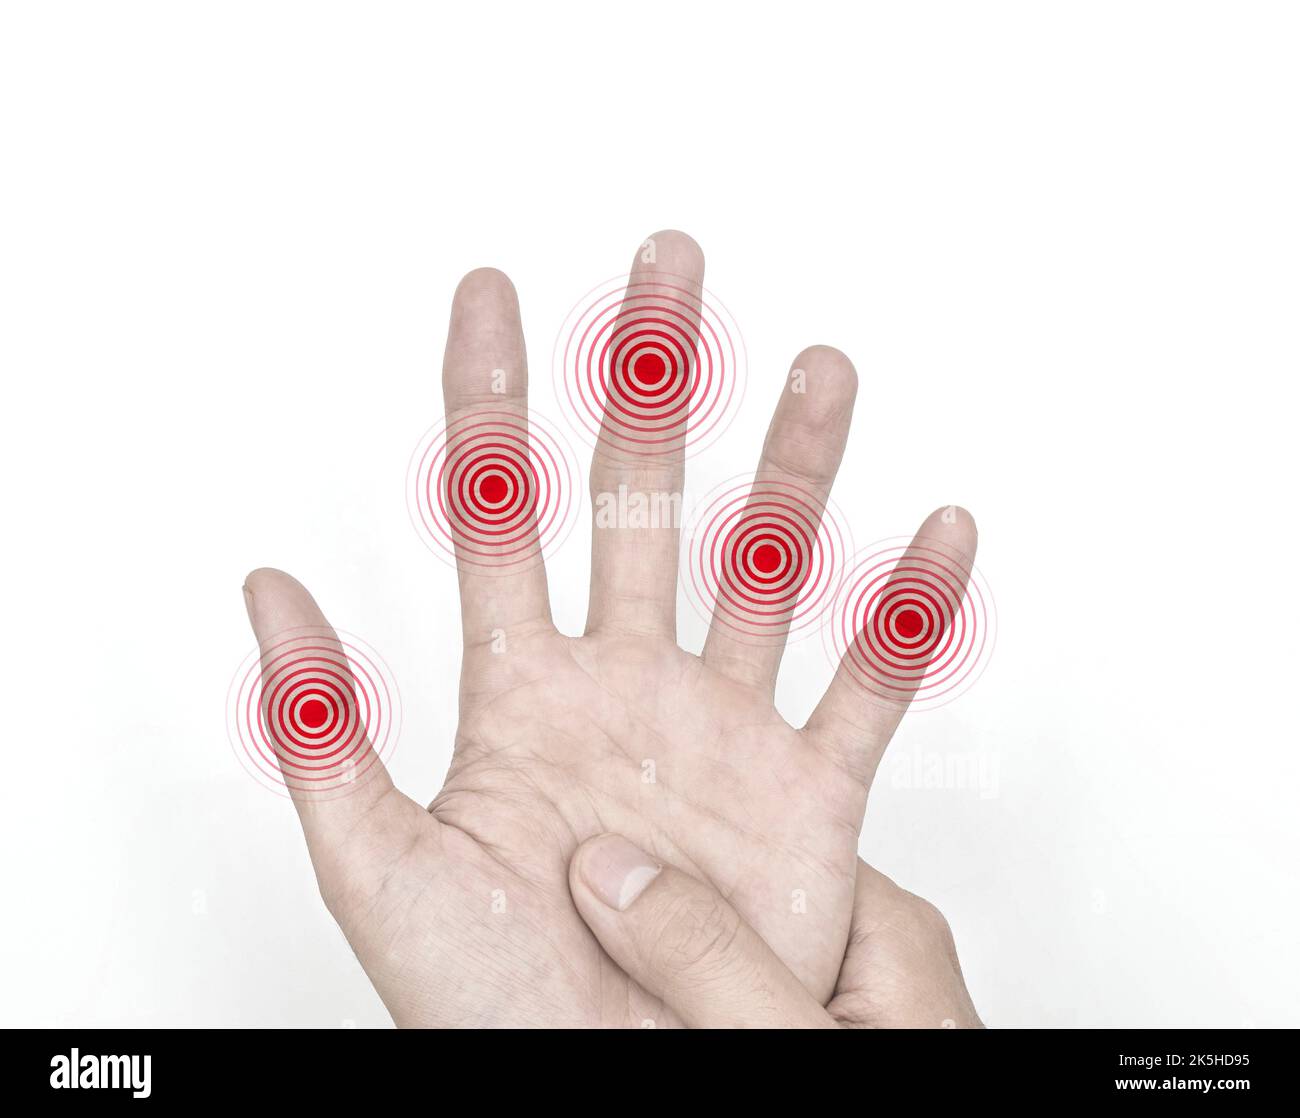 Multiple joints inflammation. Concept and idea of rheumatic arthritis, polyarthritis, hand joint swelling or arthralgia. Stock Photo